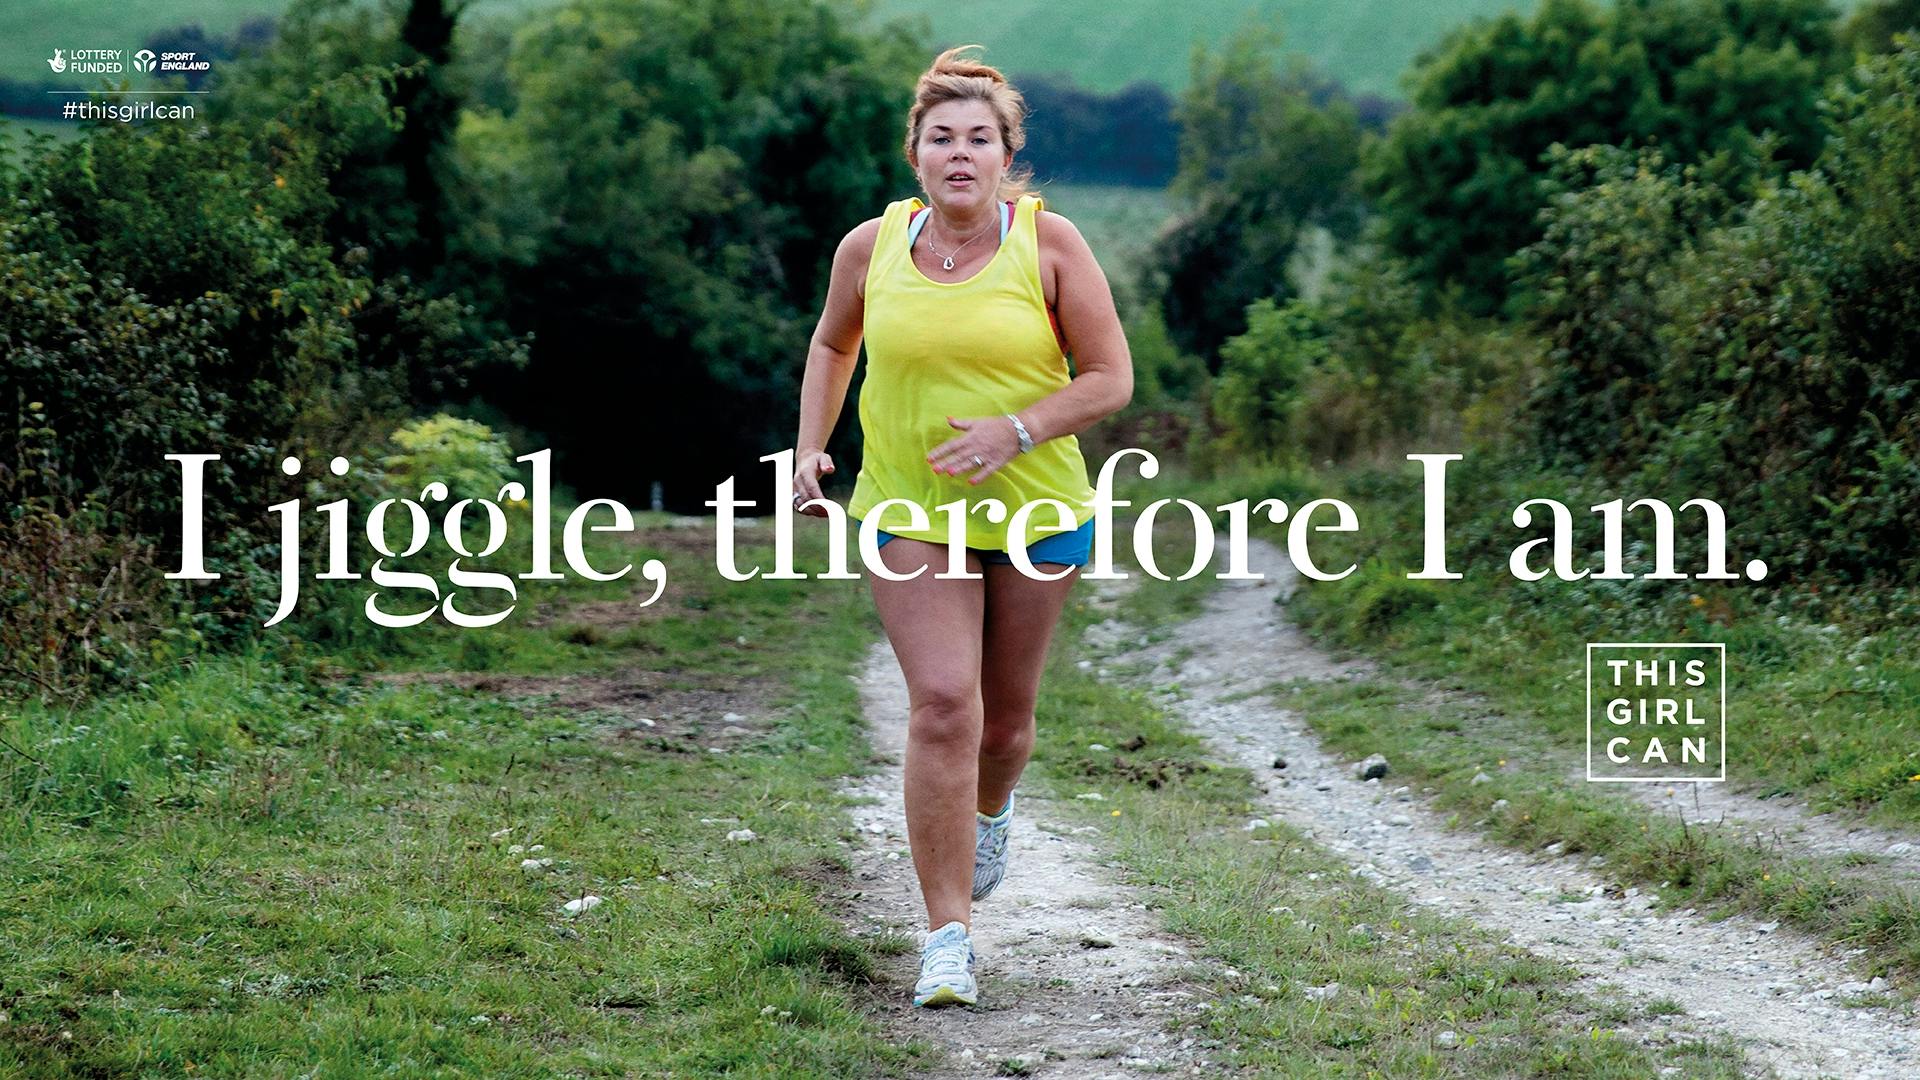 A woman jogging on a rural path with the motivational phrase "I jiggle, therefore I am." displayed, part of the "This Girl Can" campaign.